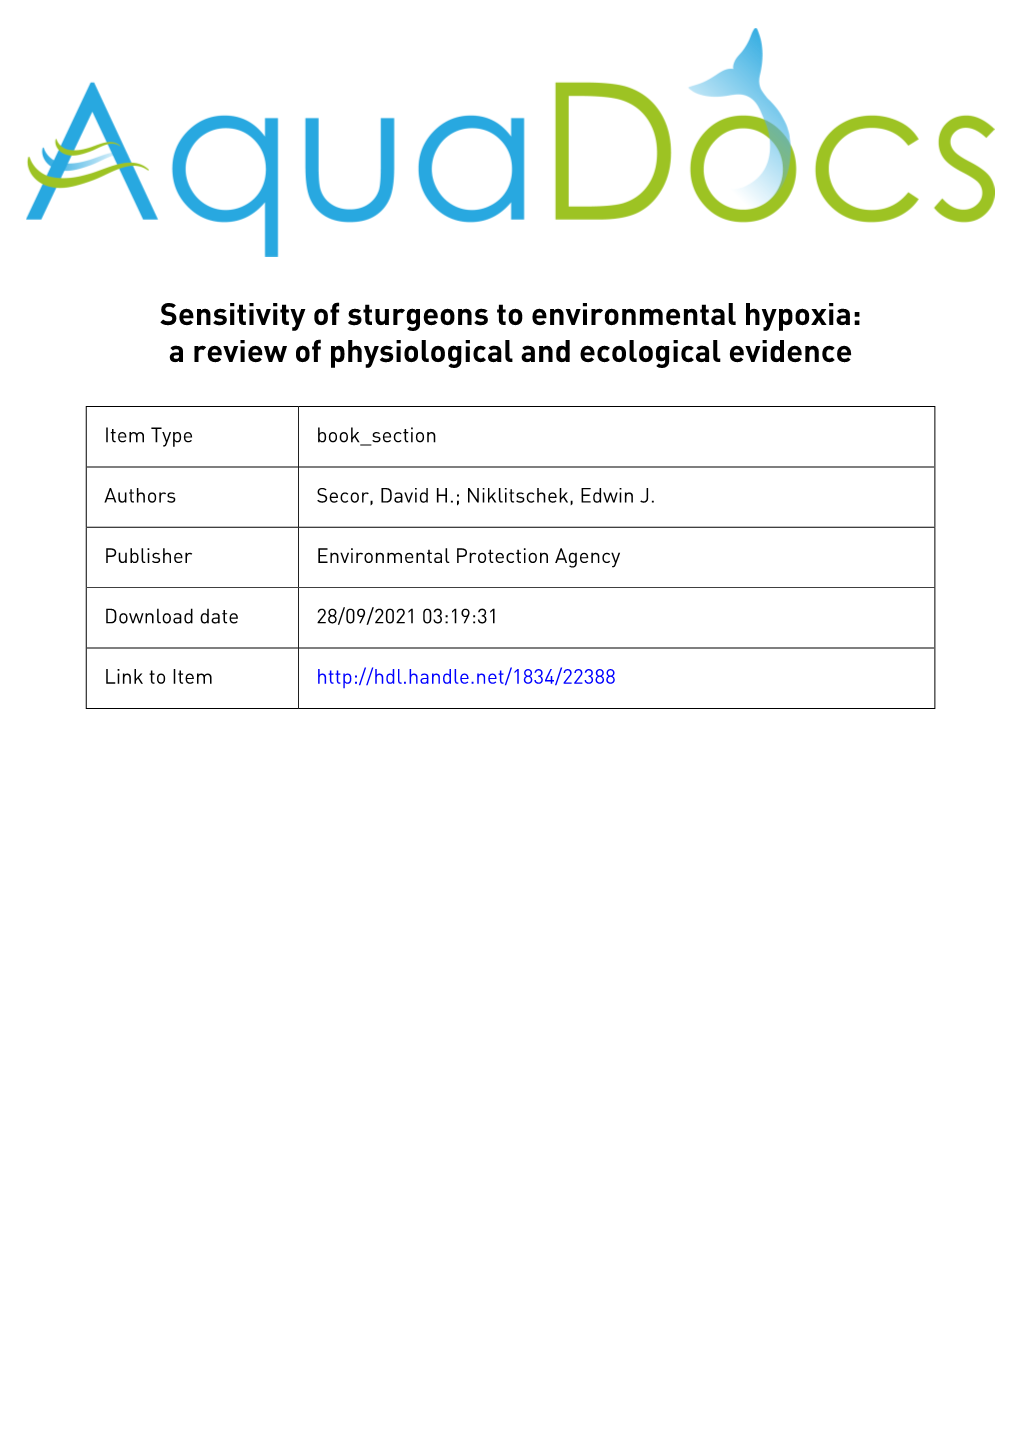 Sensitivity of Sturgeons to Environmental Hypoxia: a Review of Physiological and Ecological Evidence